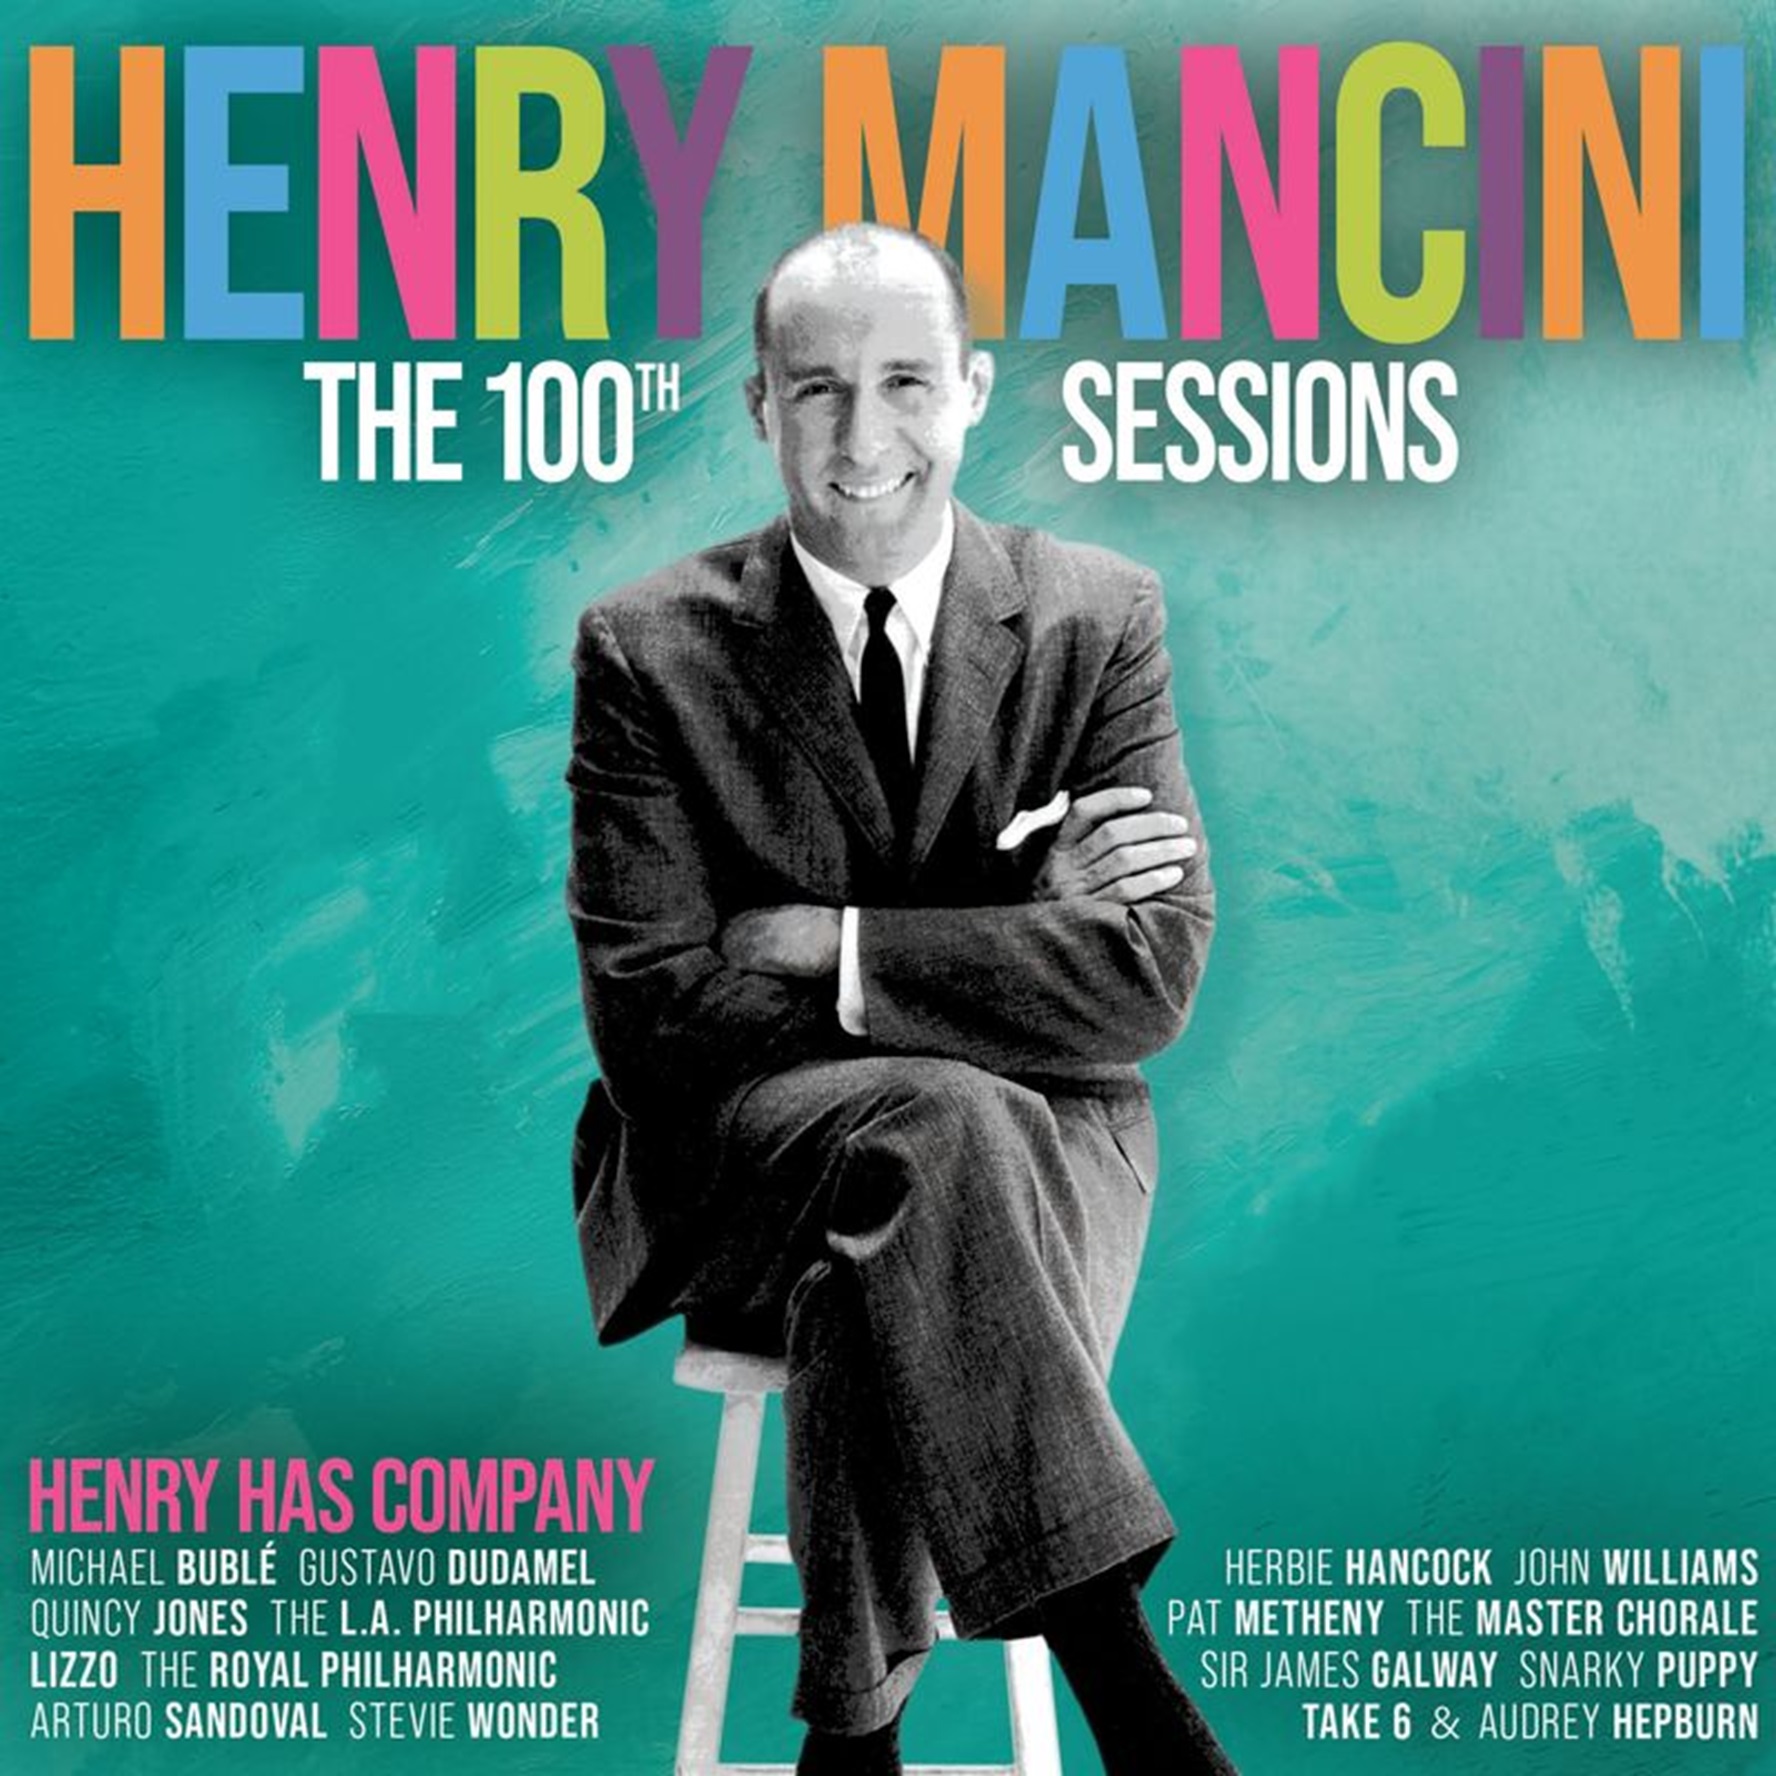 The Henry Mancini Family Celebrates The Late Composer’s 100th Birthday with Year-Long Events Including Tribute Album ft. Lizzo, Michael Bublé, Quincy Jones + more